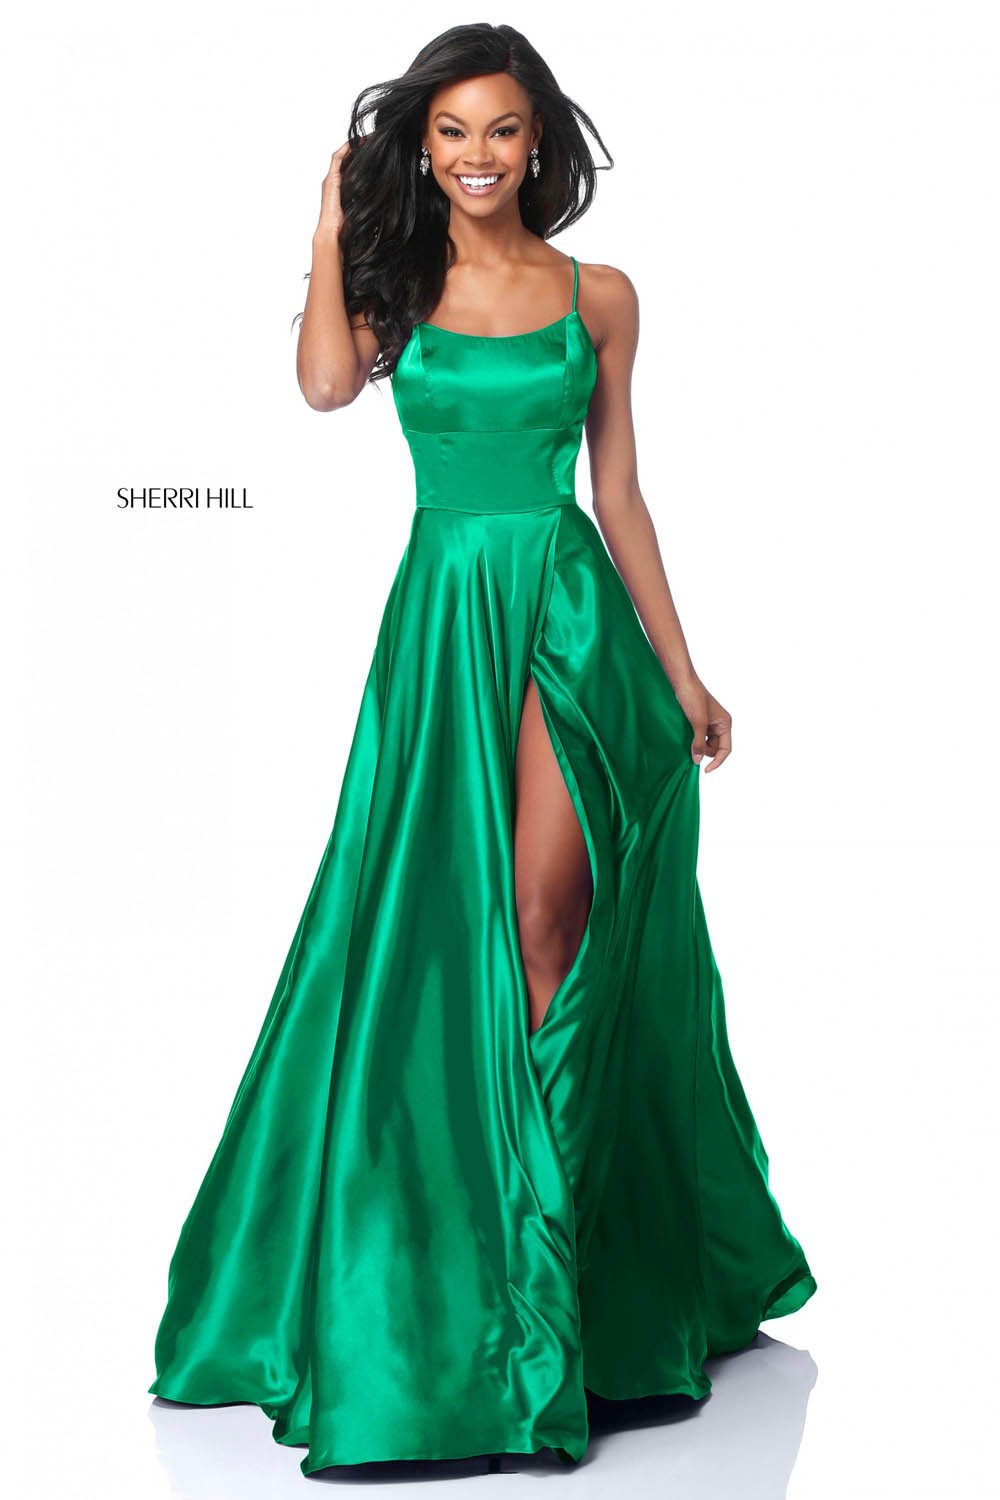 Sherri Hill 51631 dress images in these colors: Black, Gold, Purple, Gunmetal, Emerald, Ruby, Red, Royal, Fuchsia, Navy, Turquoise, Light Blue, Nude, Light Yellow, Rose.